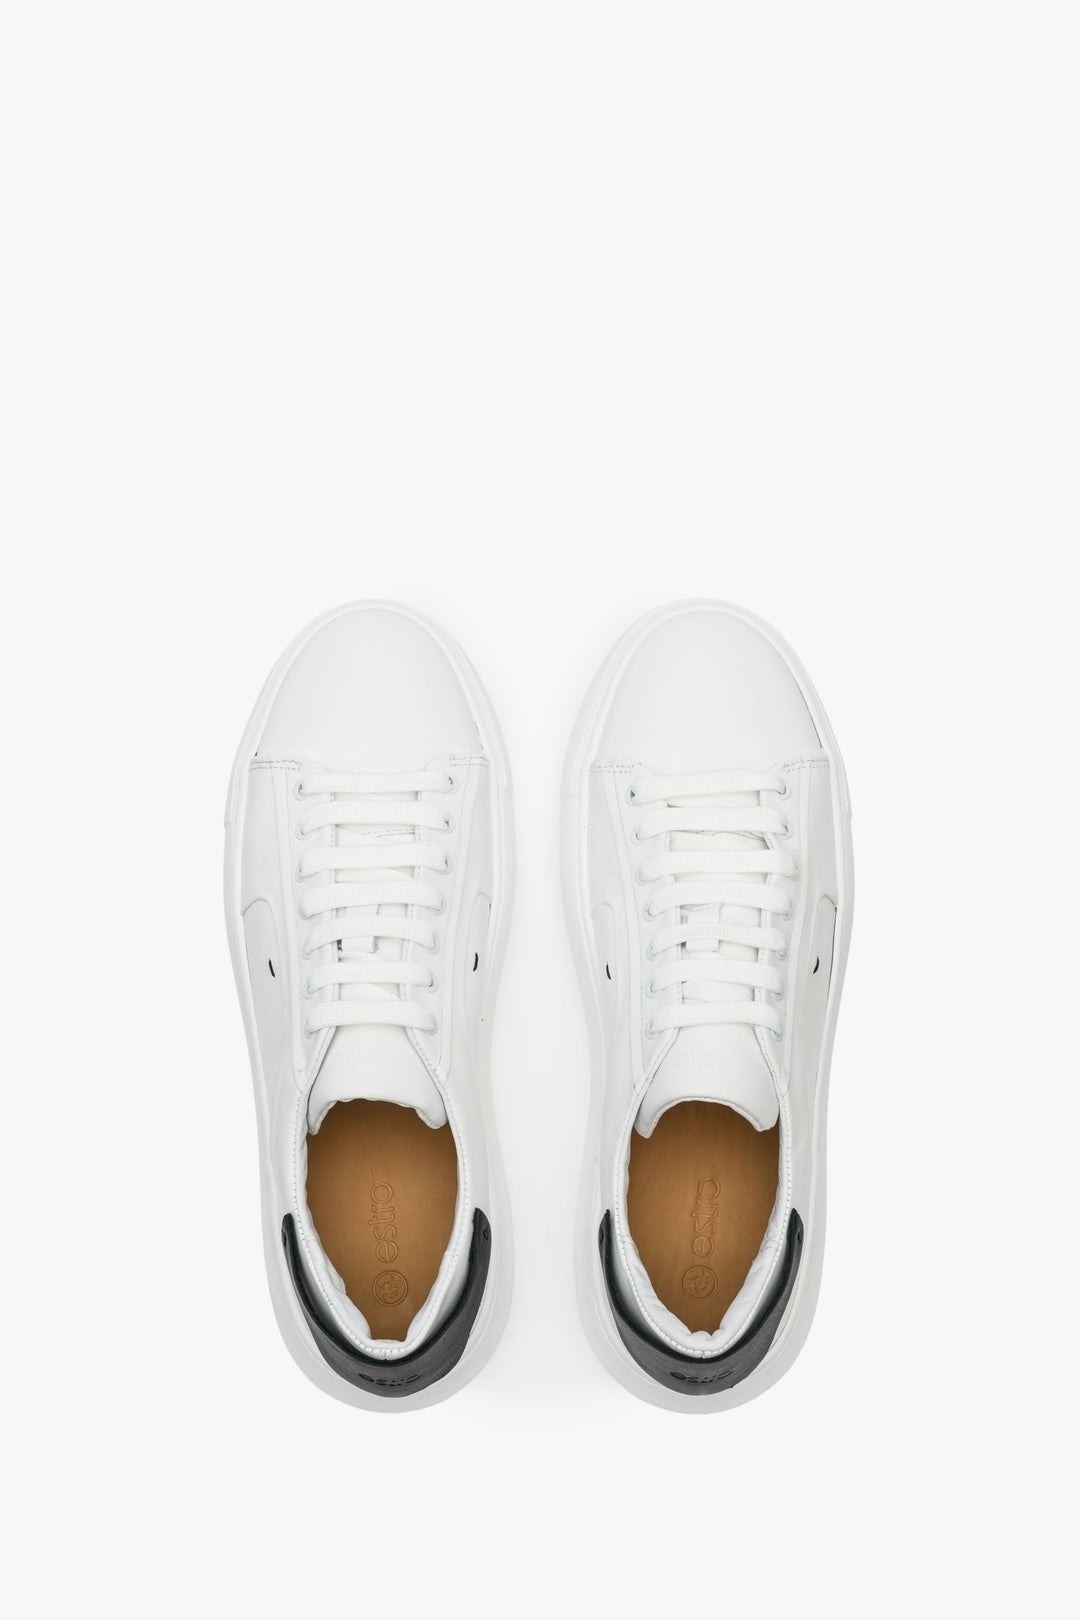 Men's white & black sneakers by Estro made of natural leather - presentation of the shoes from above.